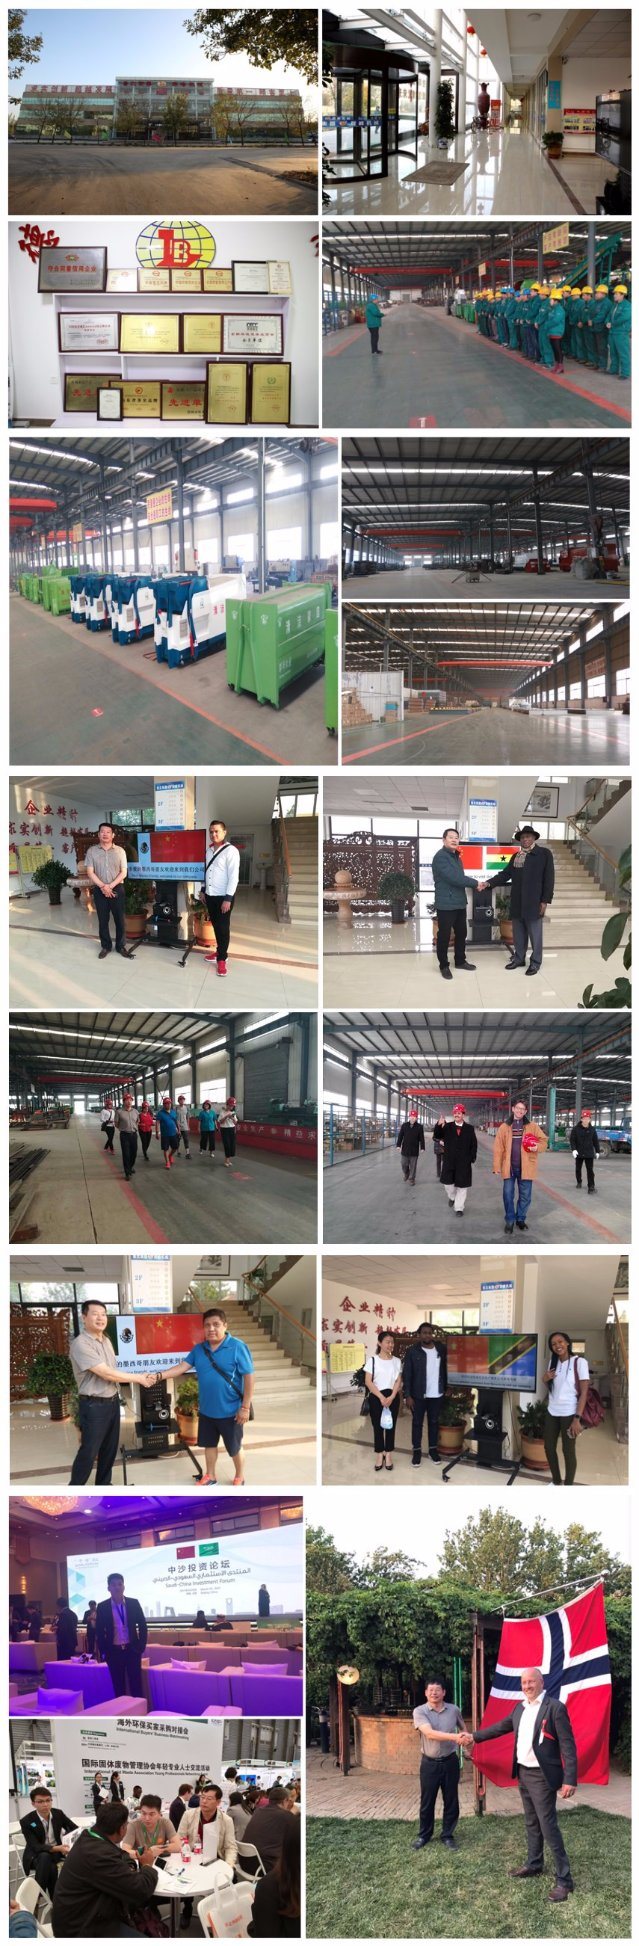 Hydraulic Recycling Waste Paper Baler for Sale/Straw/Plastic/Paper/Cardboard/Occ Press Baler Machine Made in China/Recycling Baler